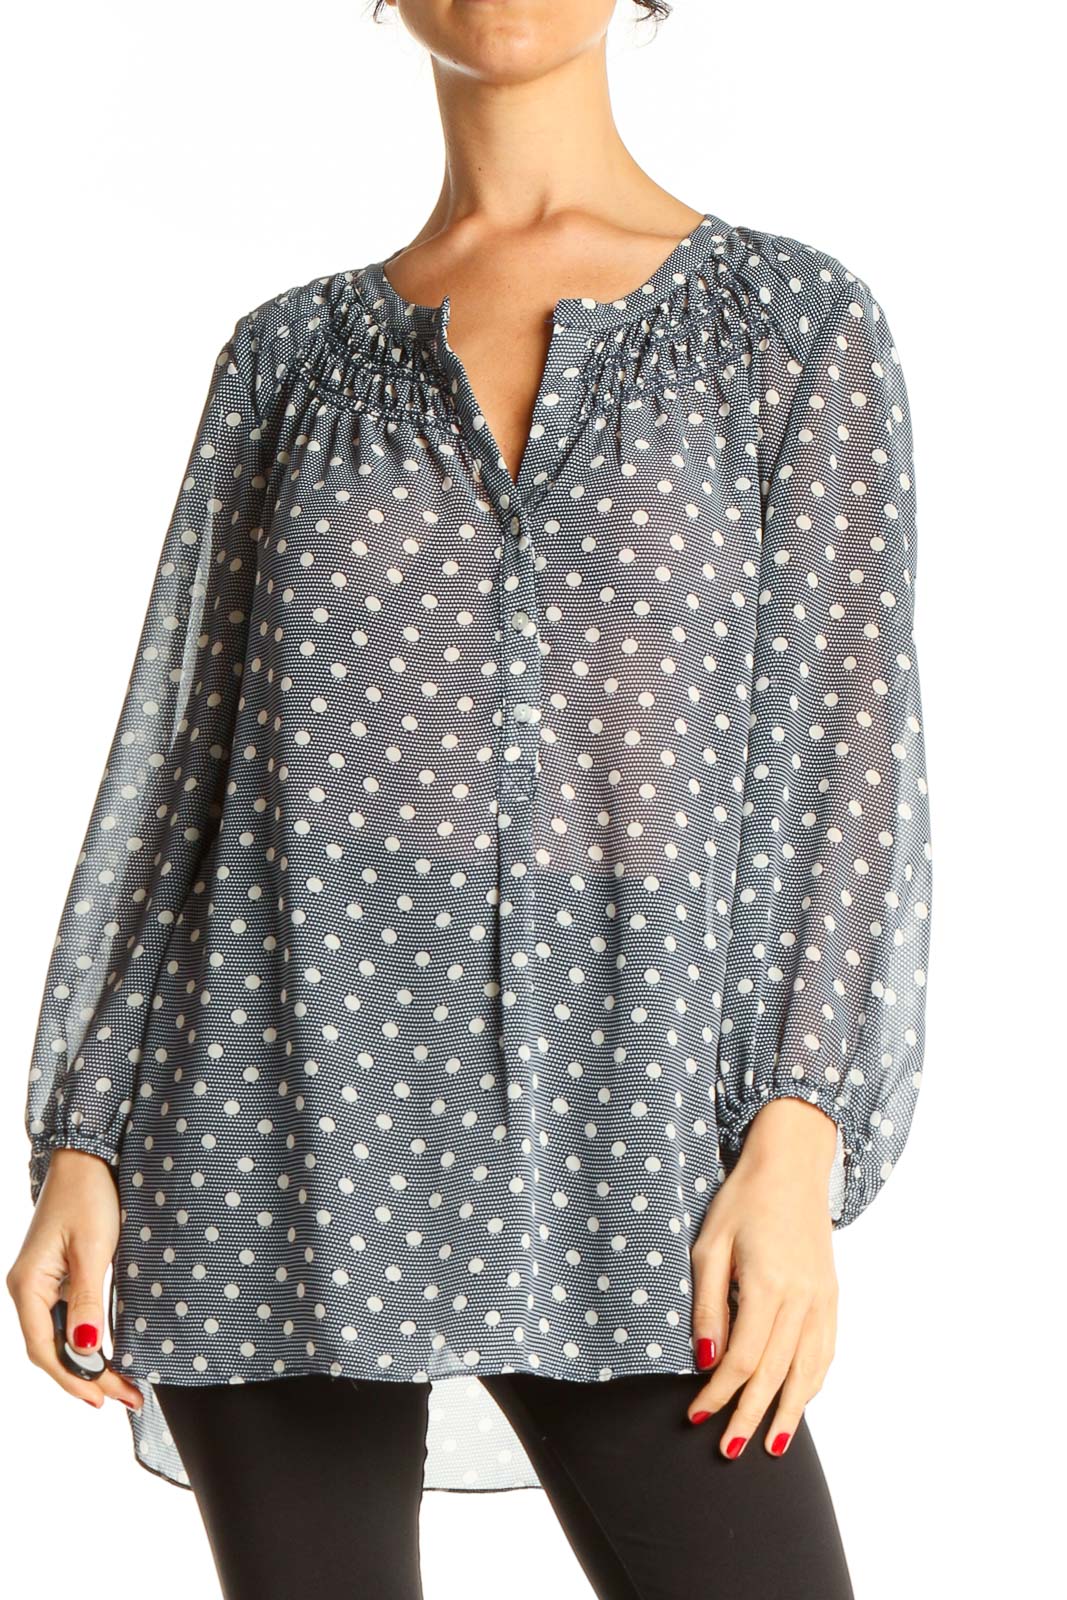 Gray Polka Dot All Day Wear Top Front